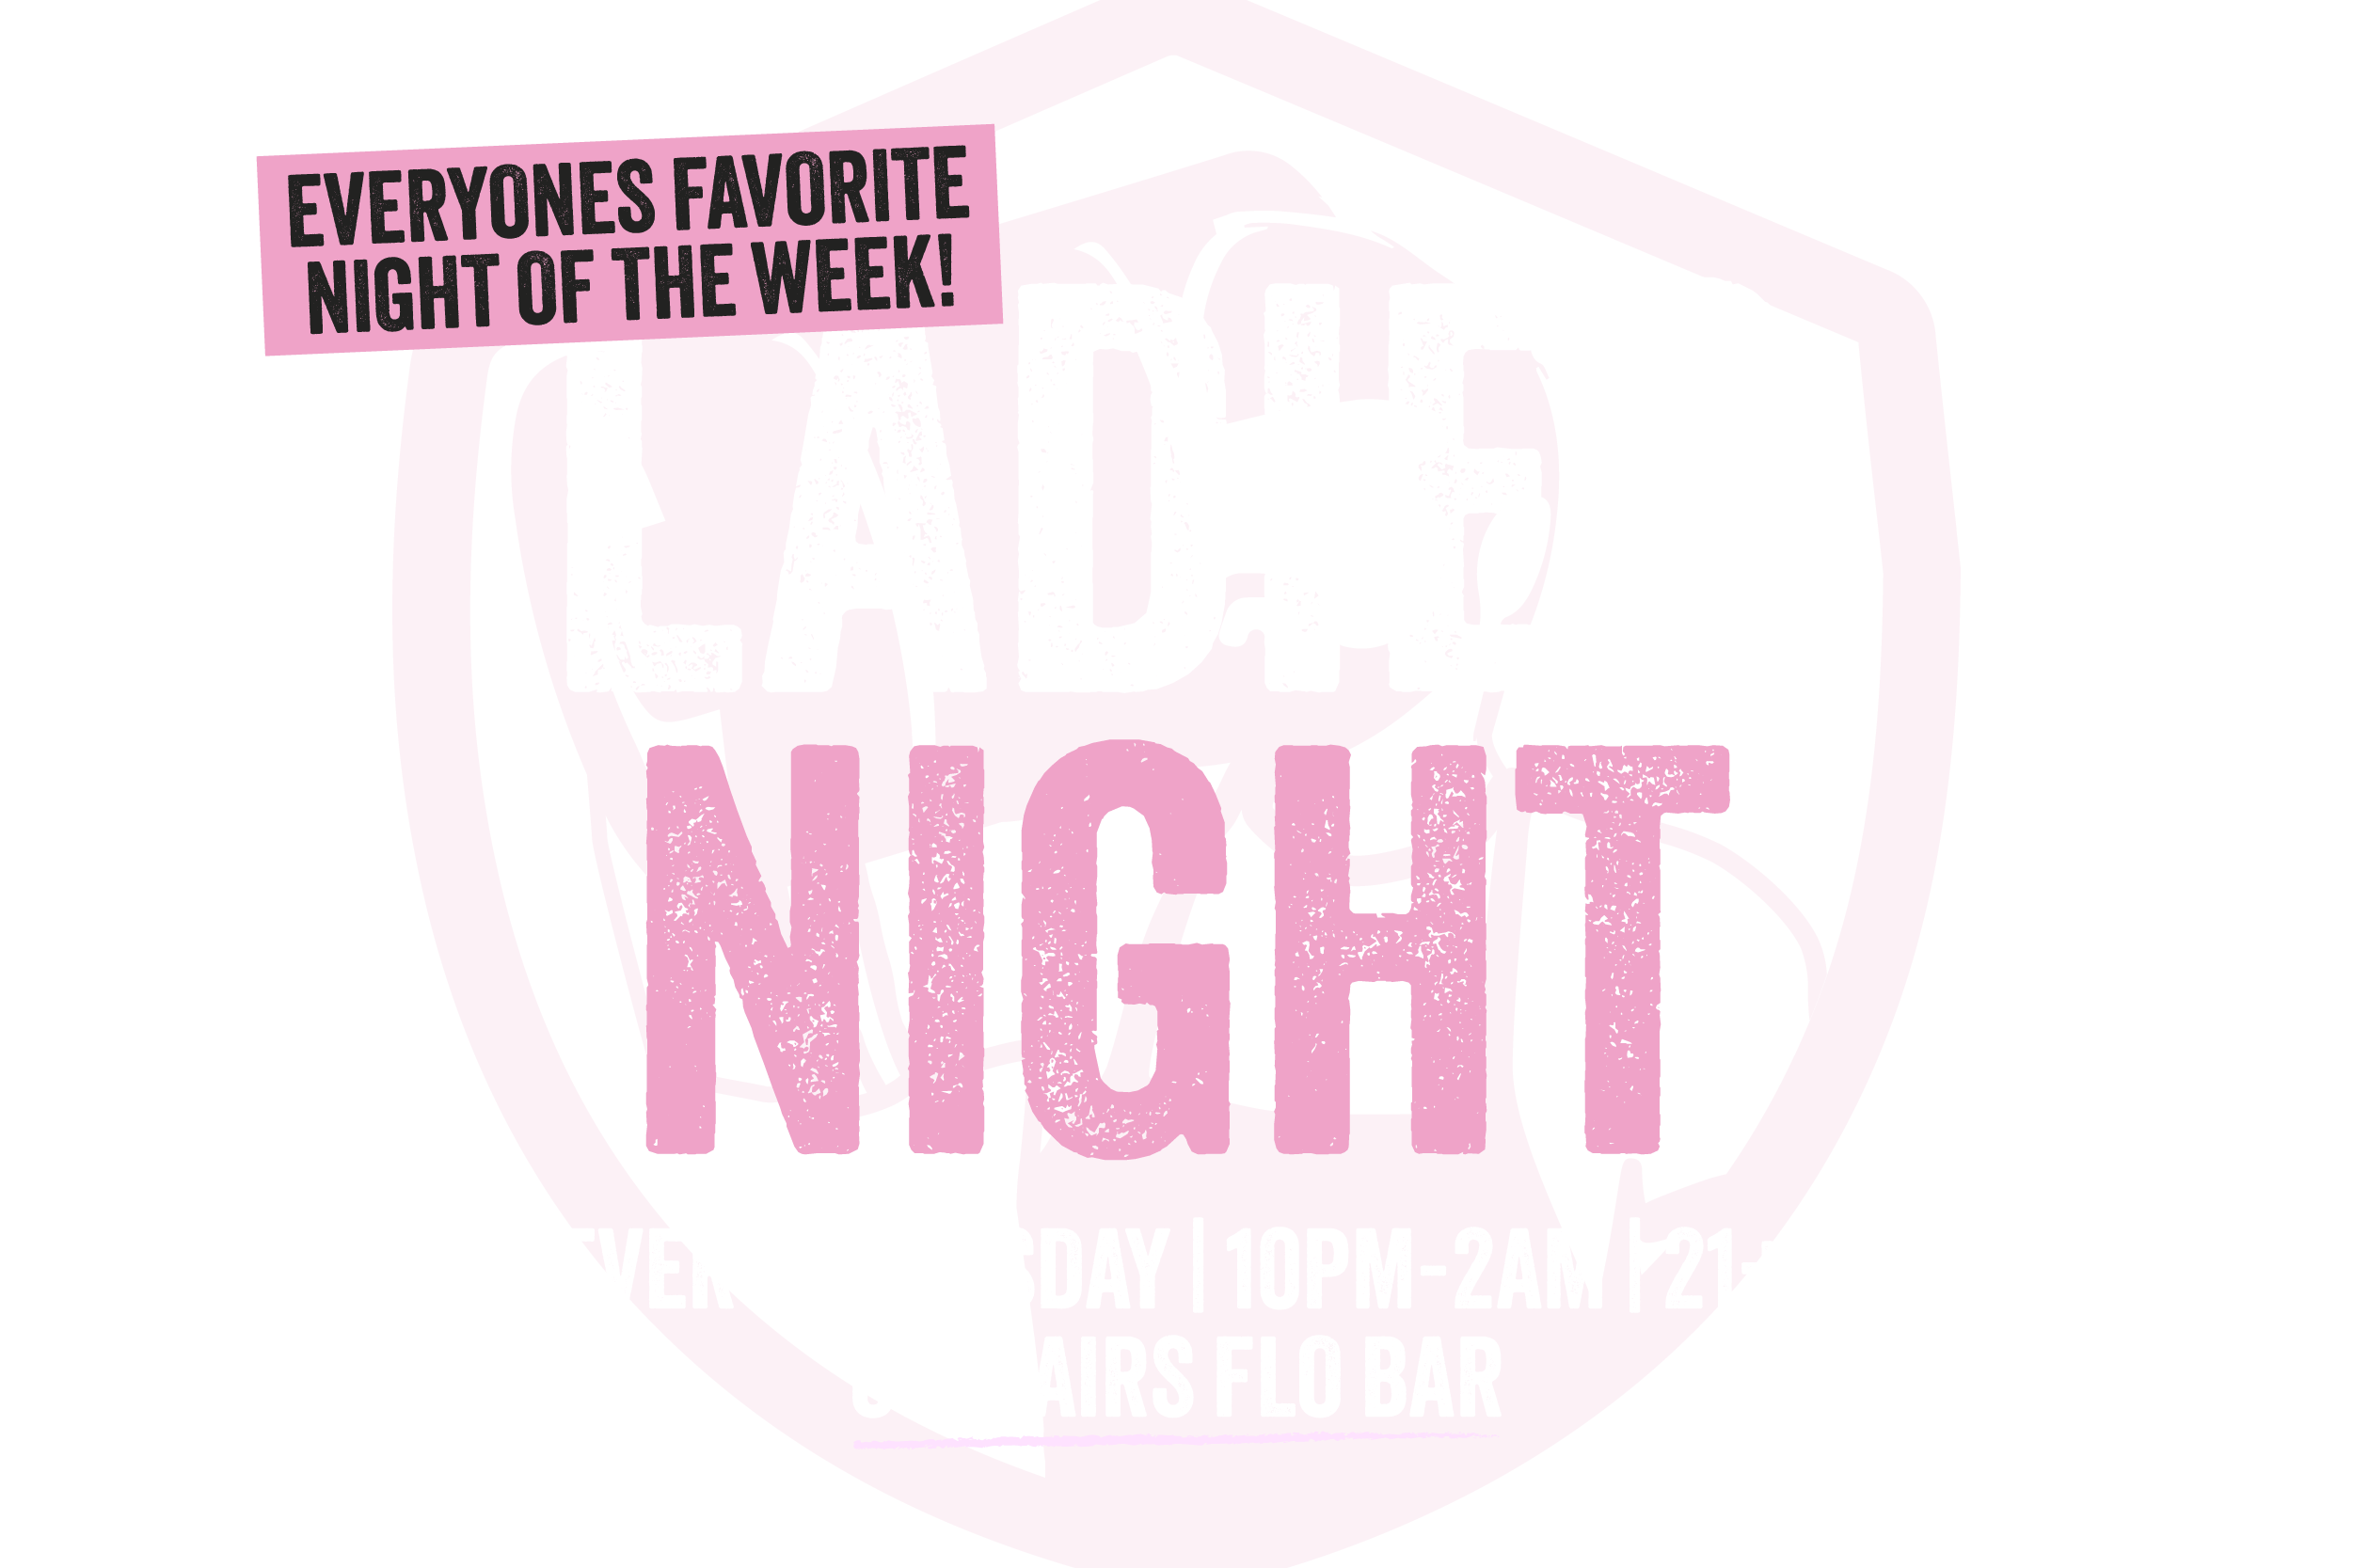 Everyones favorite night of the week! Ladies Night | Every Thursday | 10PM-2AM | 21+ | Upstairs Flo Bar